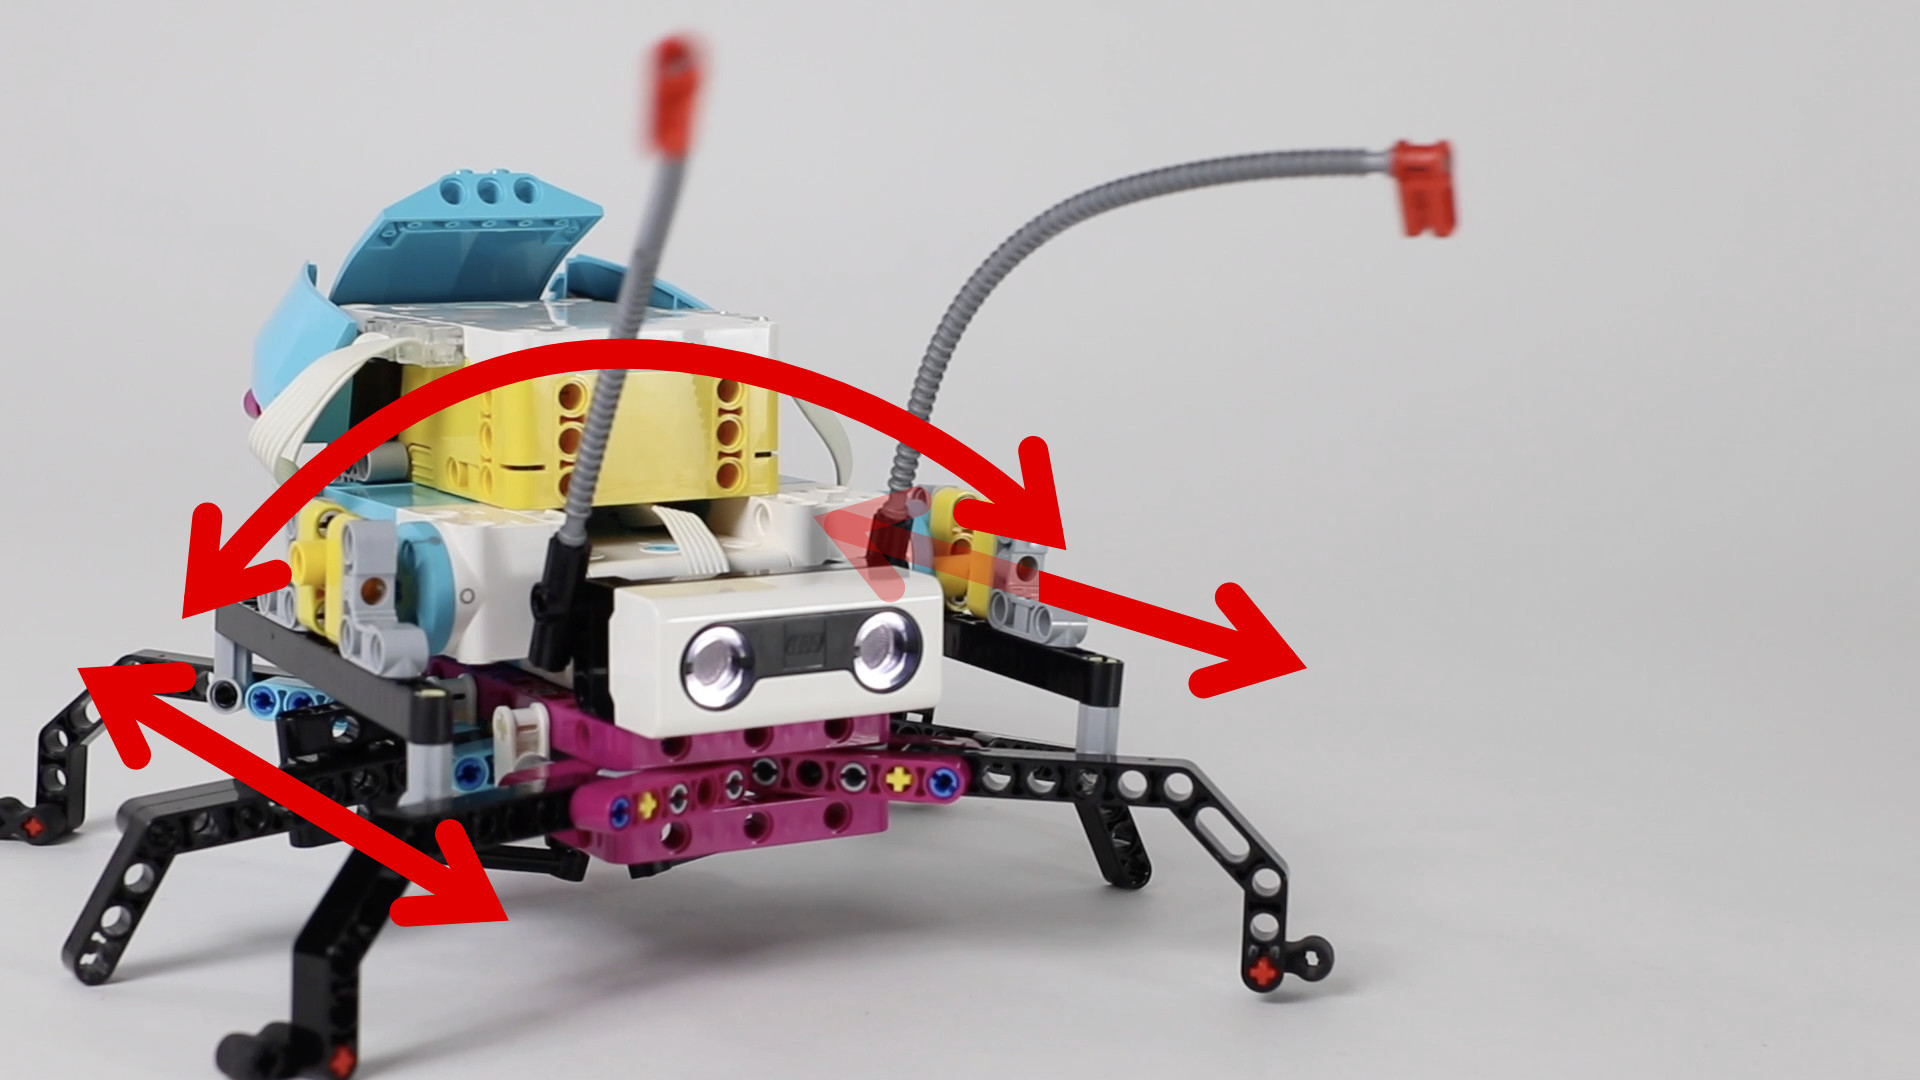 Using Scratch to Control Mindstorms Robots - Make